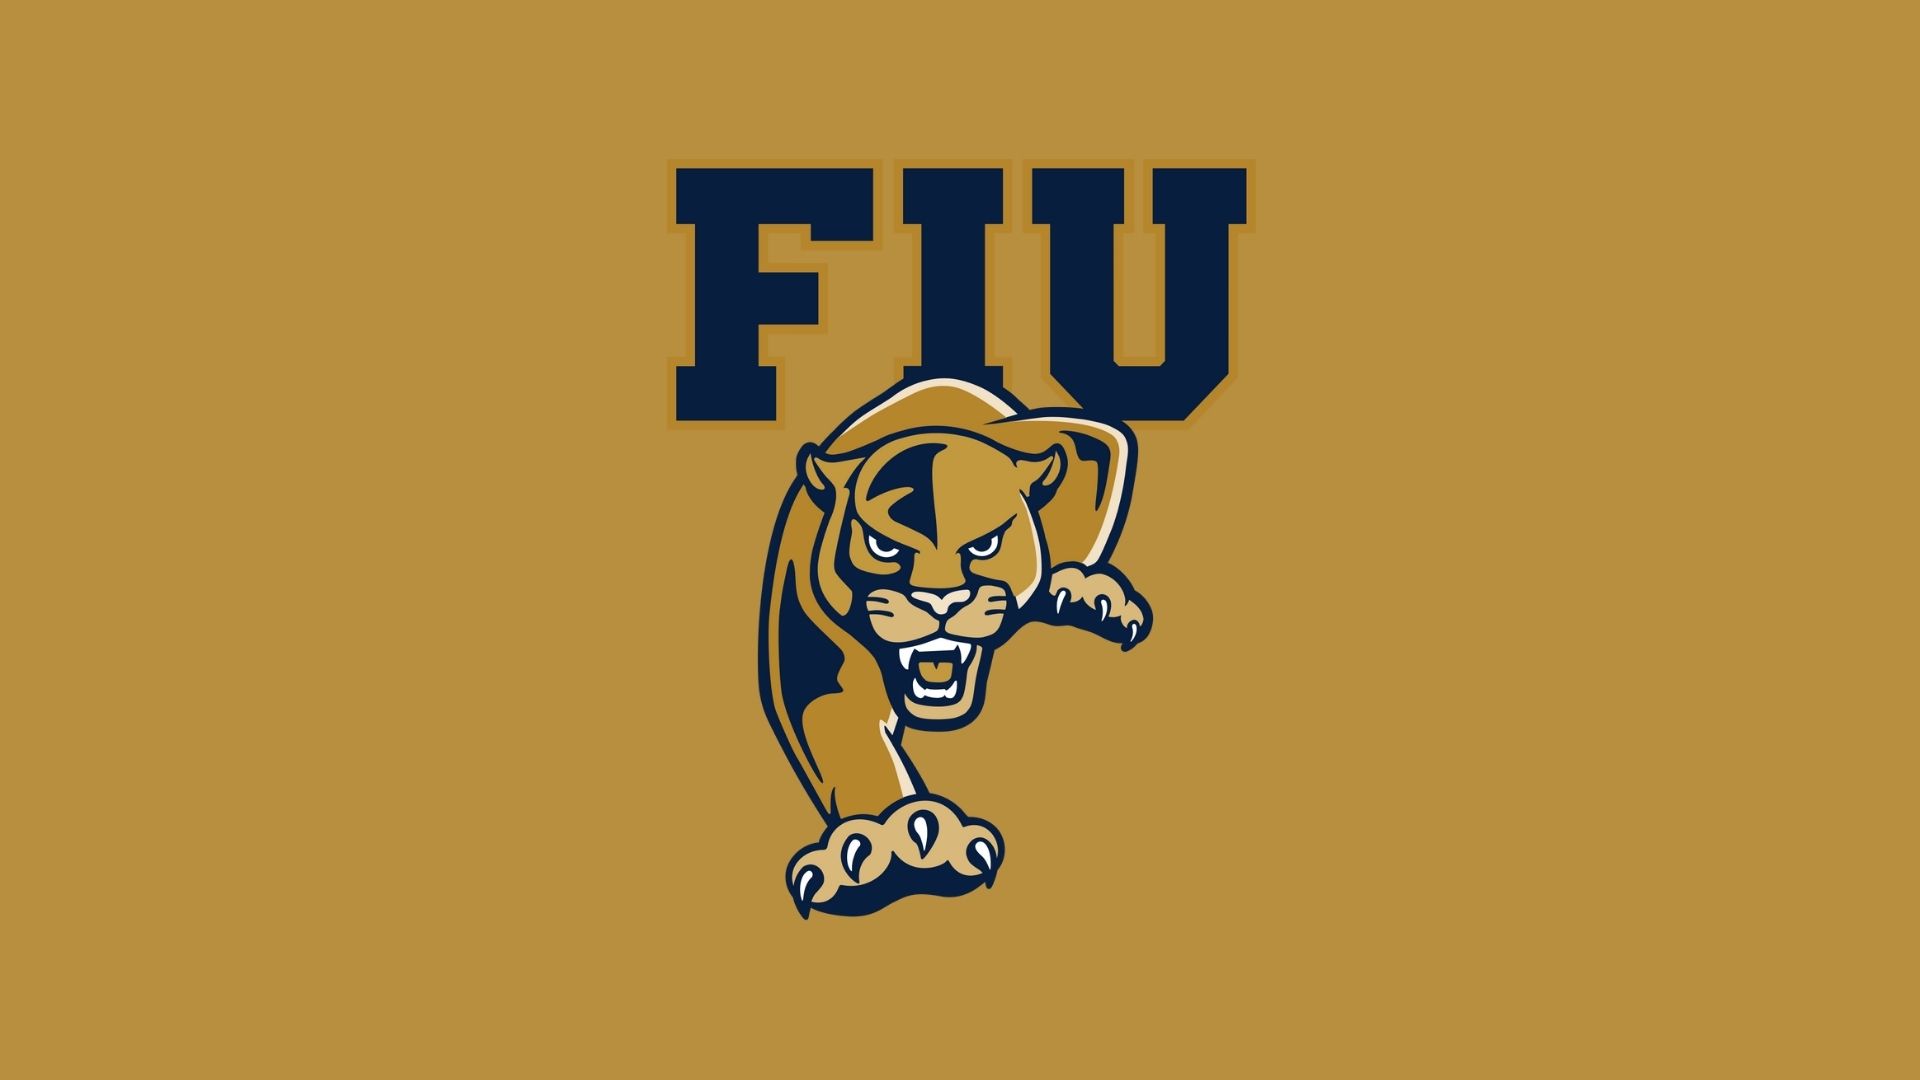 Rodriguez promoted to Assistant Head Basketball Coach at FIU